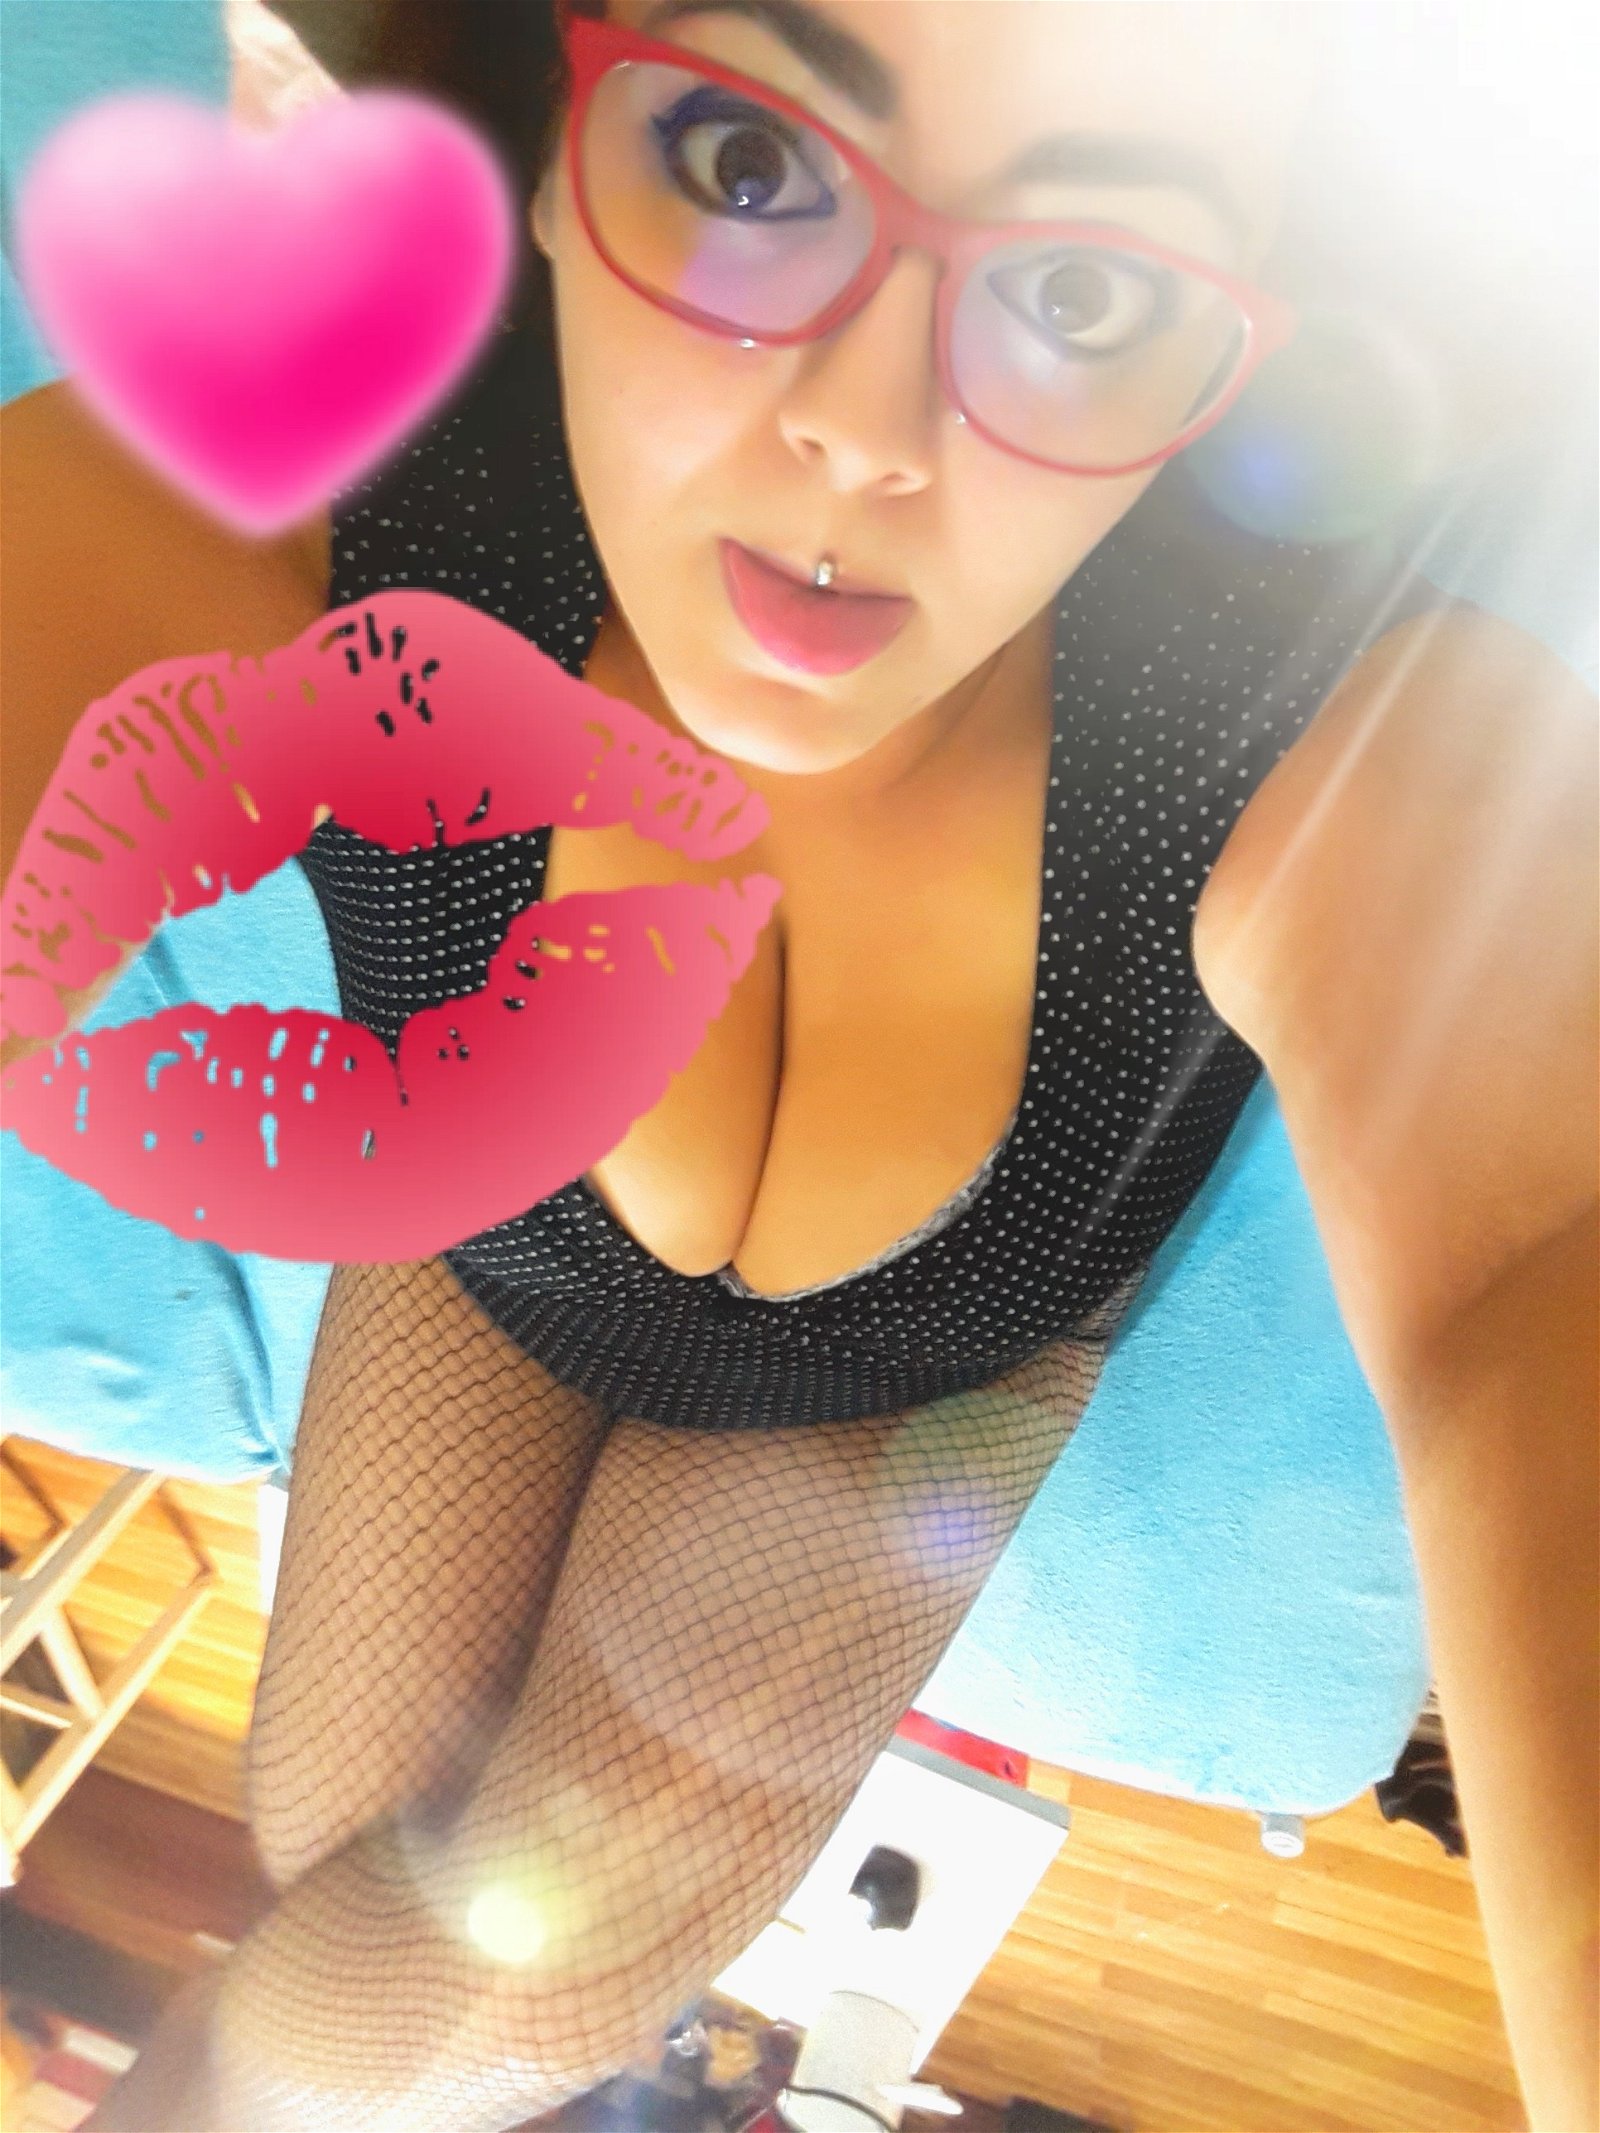 Photo by BustyVonKat with the username @BustyVonKat, who is a star user,  February 7, 2019 at 10:14 PM and the text says 'Come join me on mfc.

https://t.co/7OeHbUd2Jl

Let's have some fuuuun 😜💋

#cammodel #bbw #myfreecams'